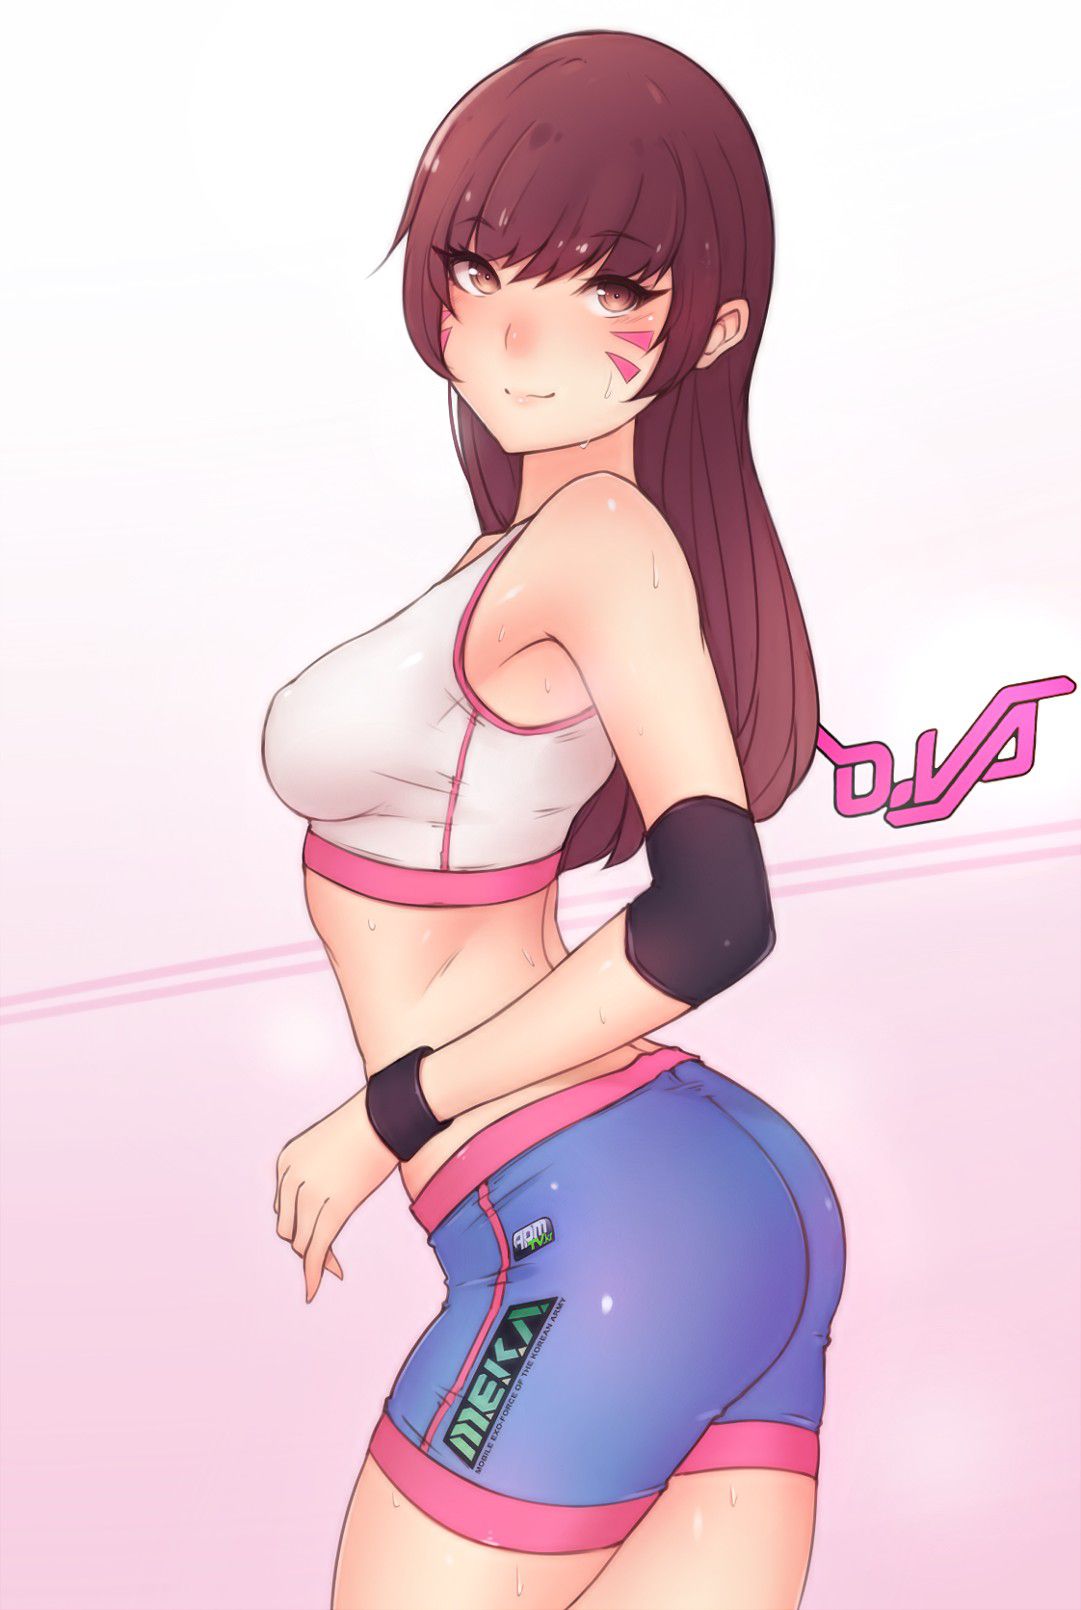 [2nd] The second erotic image of a pretty girl wearing a sports bra [sports bra] 2